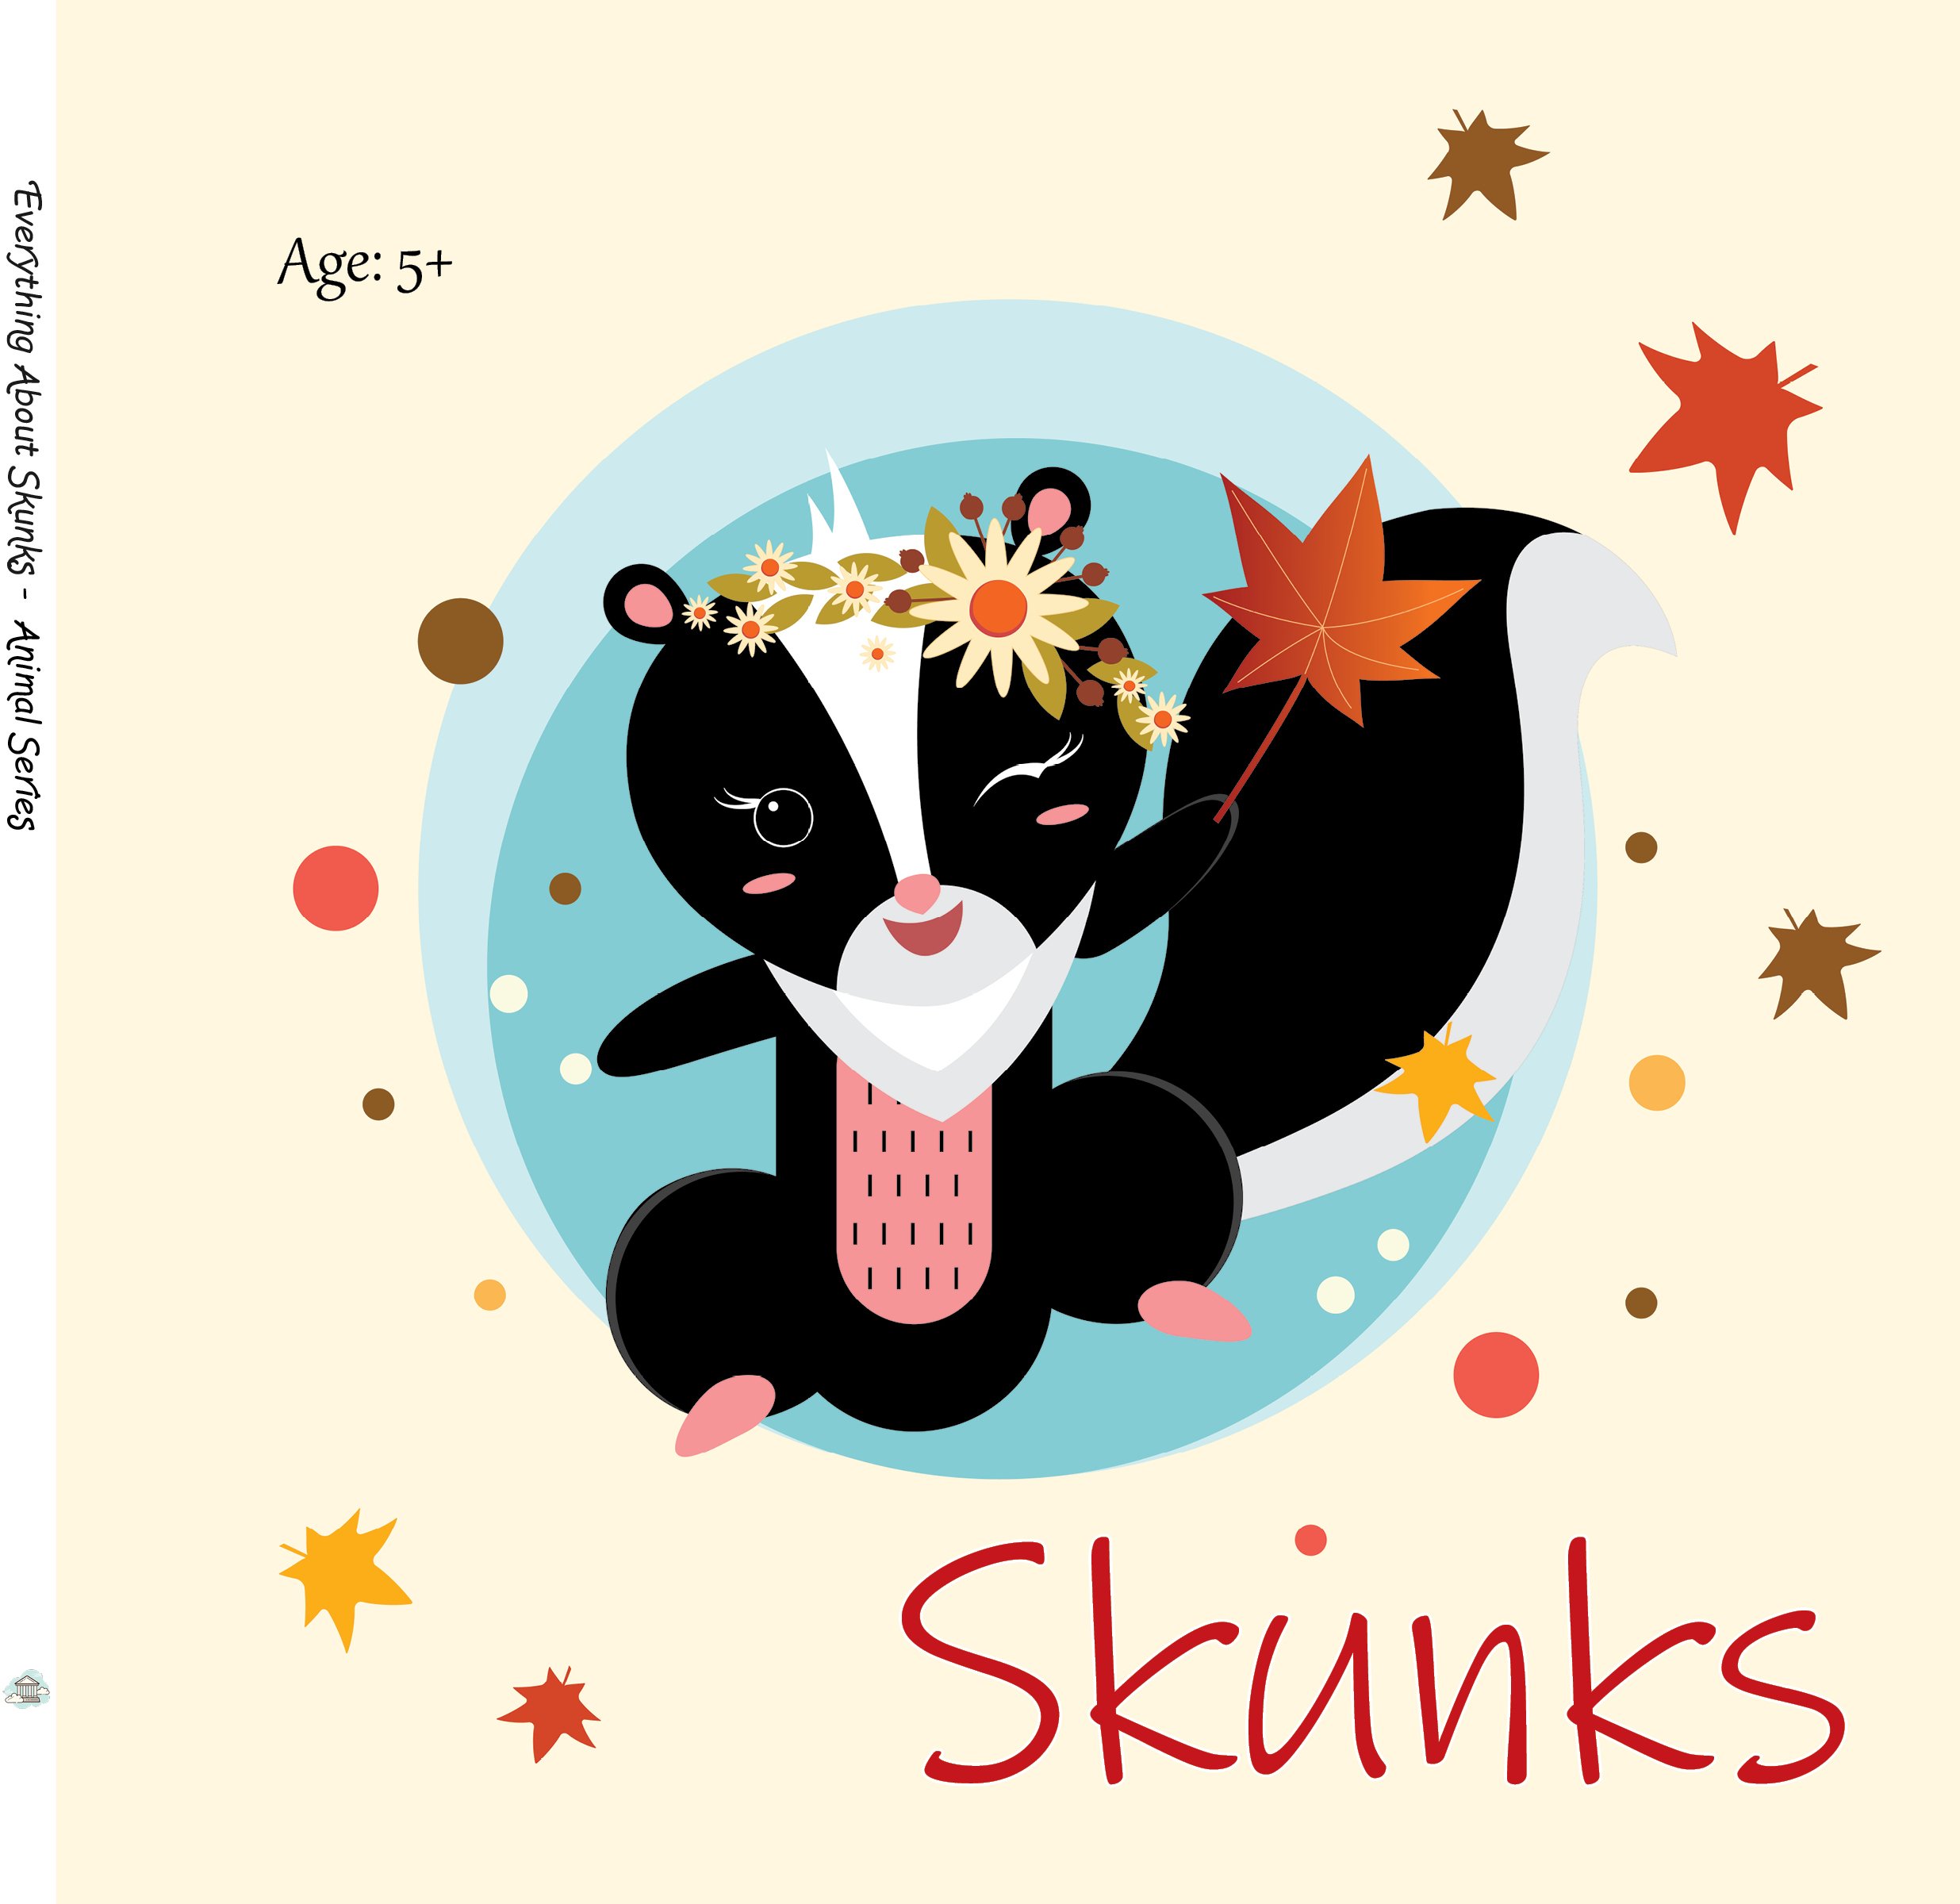 Everything about Skunks.jpg